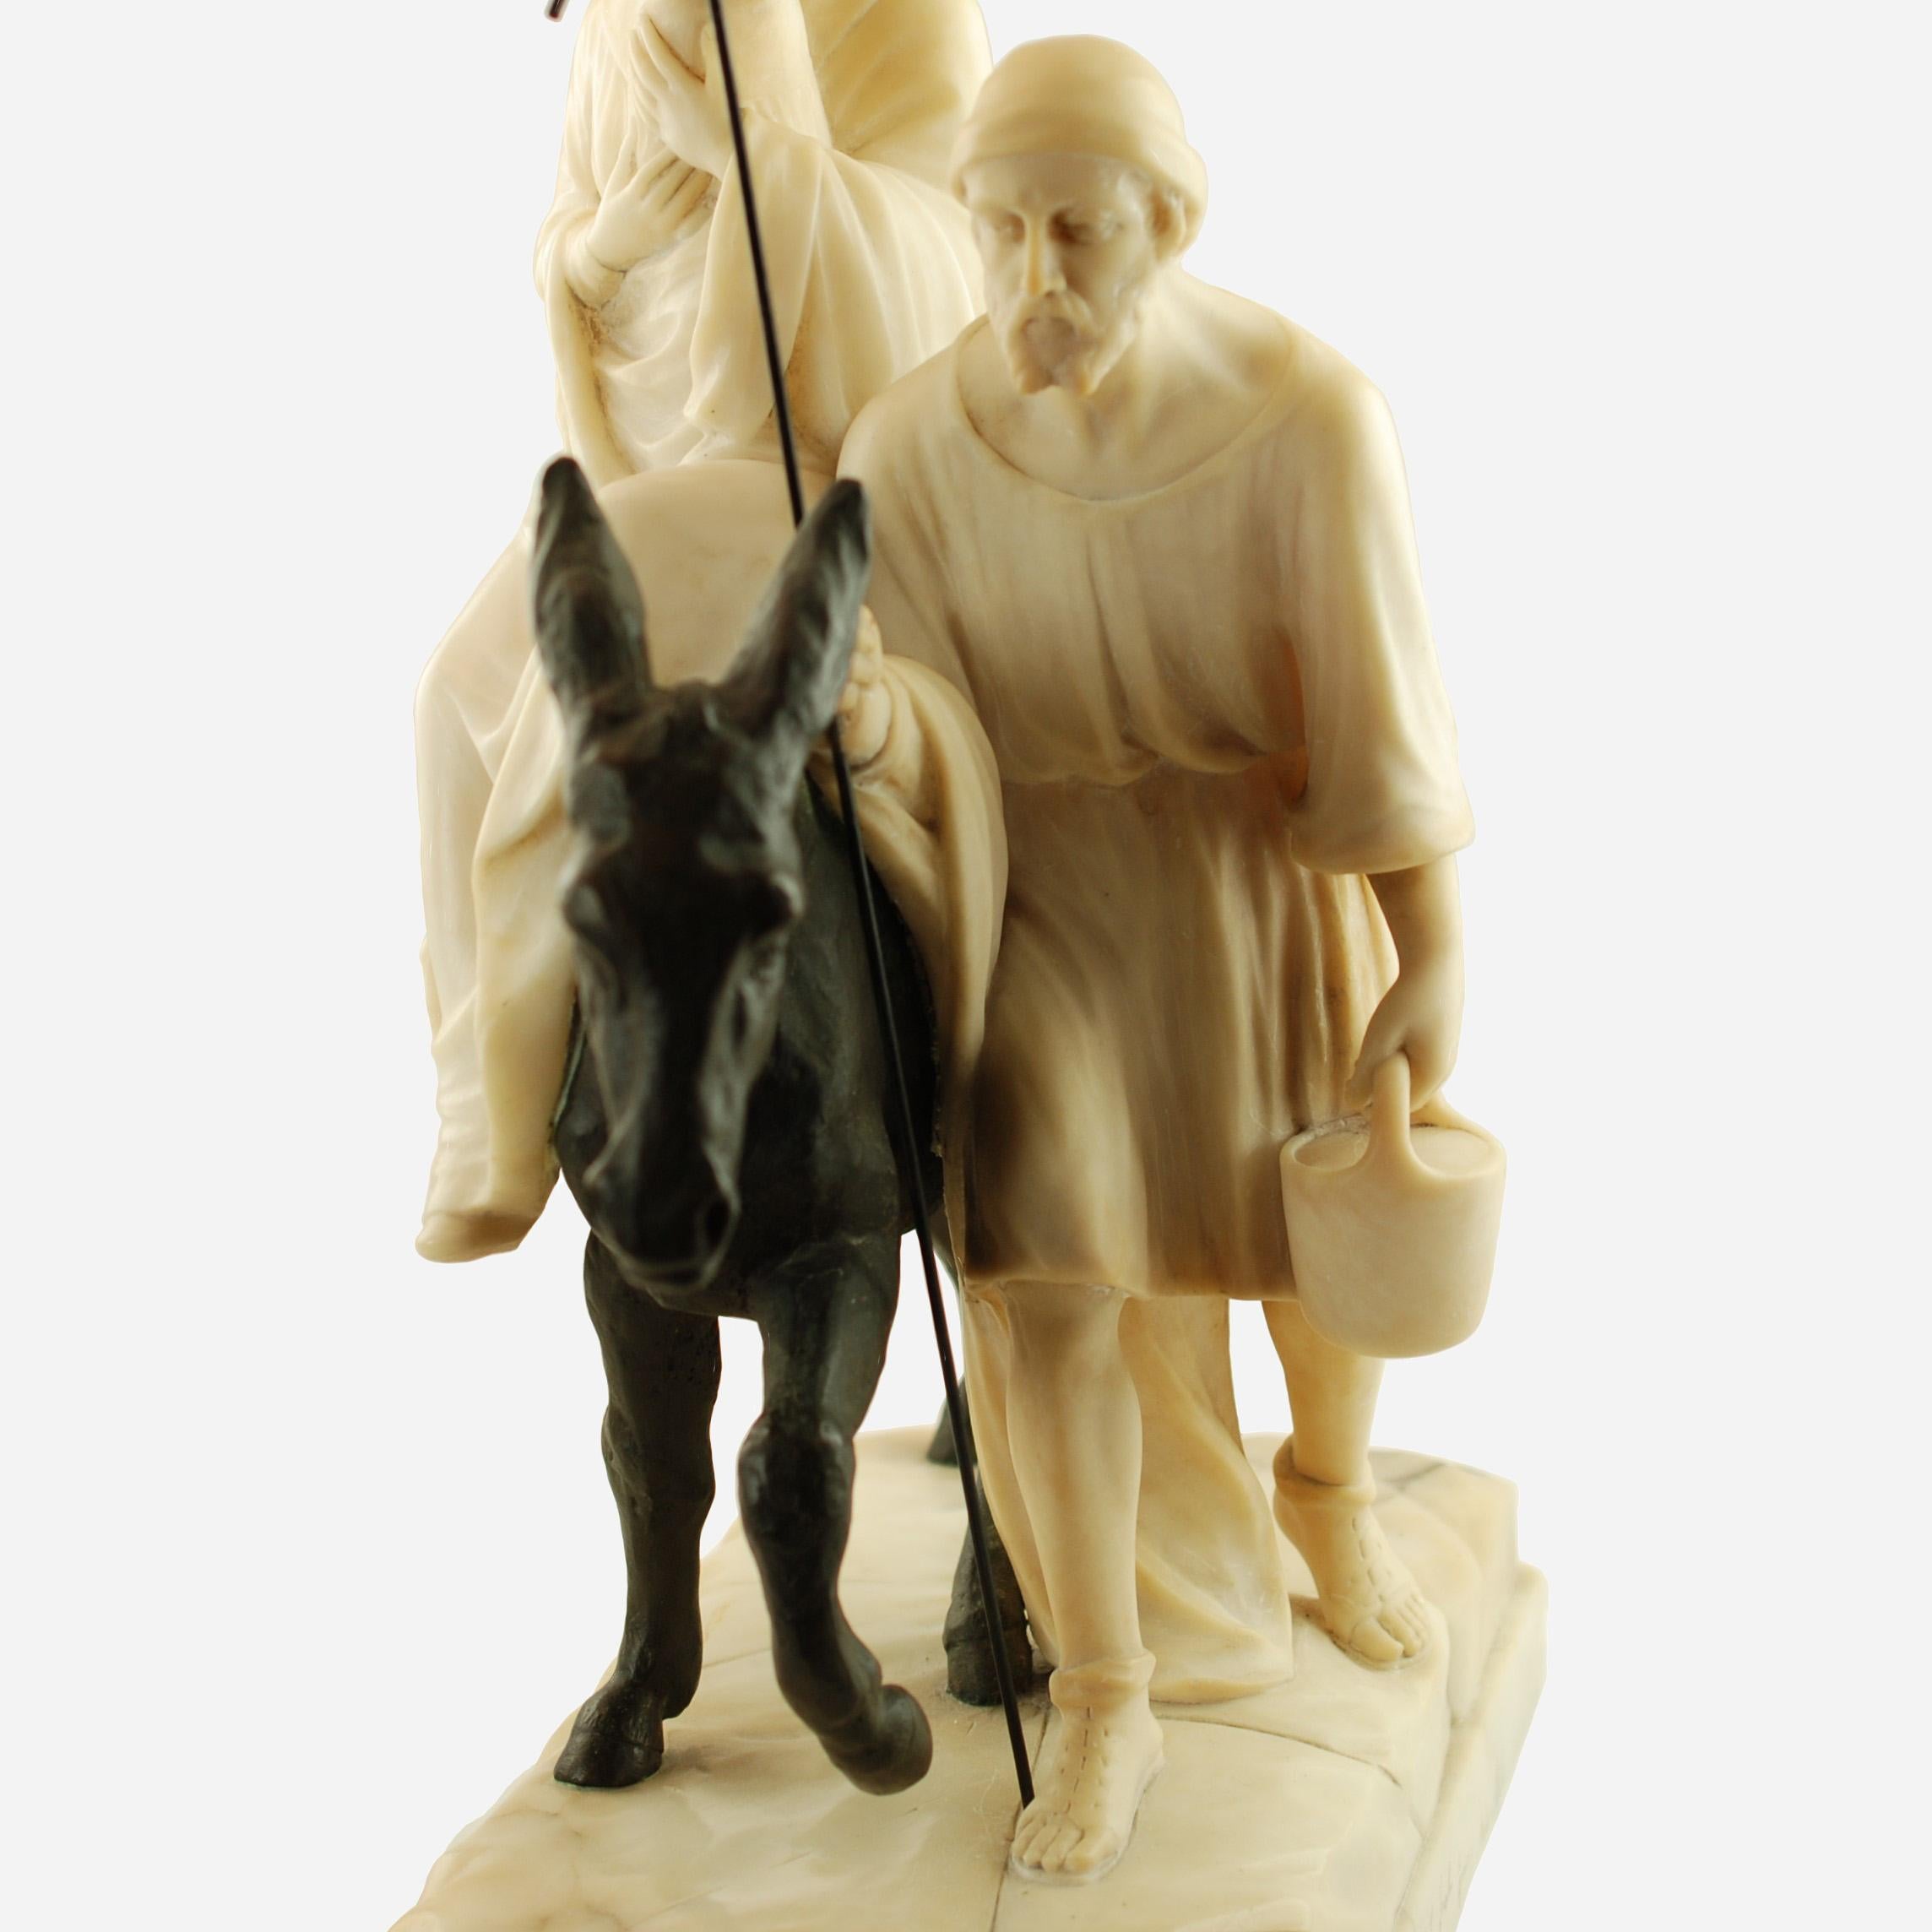 19th Century E. Fiaschi Flight into Egypt Alabaster, Bronze & Marble Holy Family Sculpture For Sale